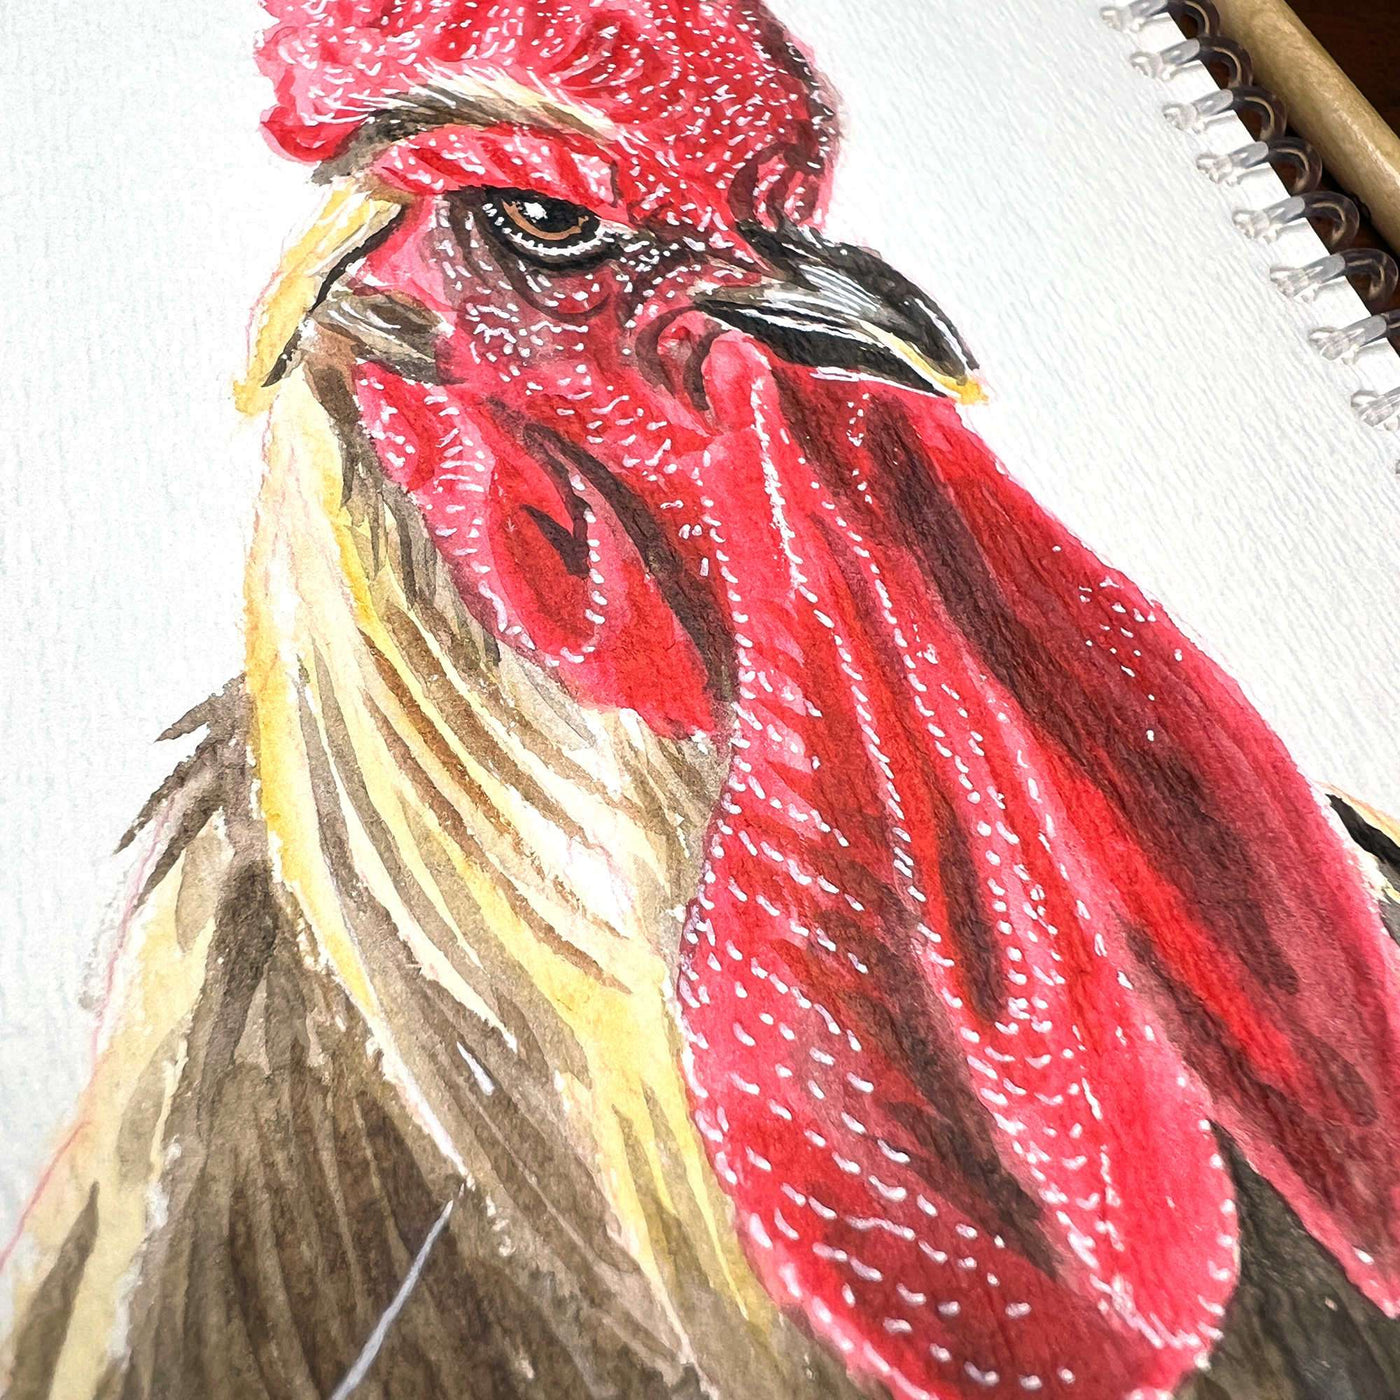 Pigeon/Rooster - Original Watercolor Painting of a rooster with detailed red combs and wattles, focusing on its head and neck, displayed on a sketchpad.